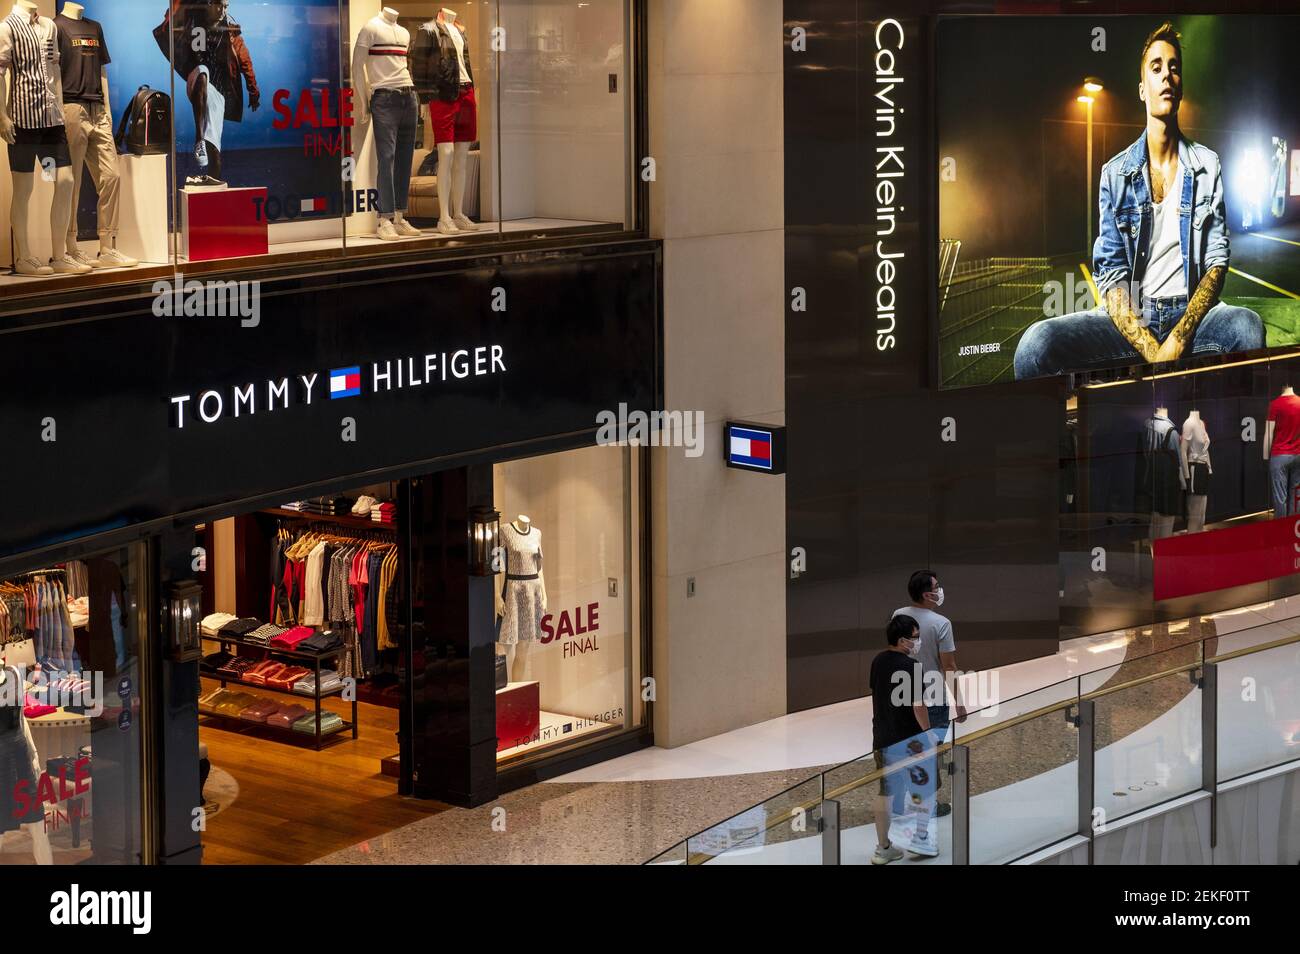 American clothing fashion brand Tommy Hilfiger store and fashion brand Calvin Klein Jeans seen at a shopping mall in Hong Kong. (Photo by Budrul Chukrut / Images/Sipa USA